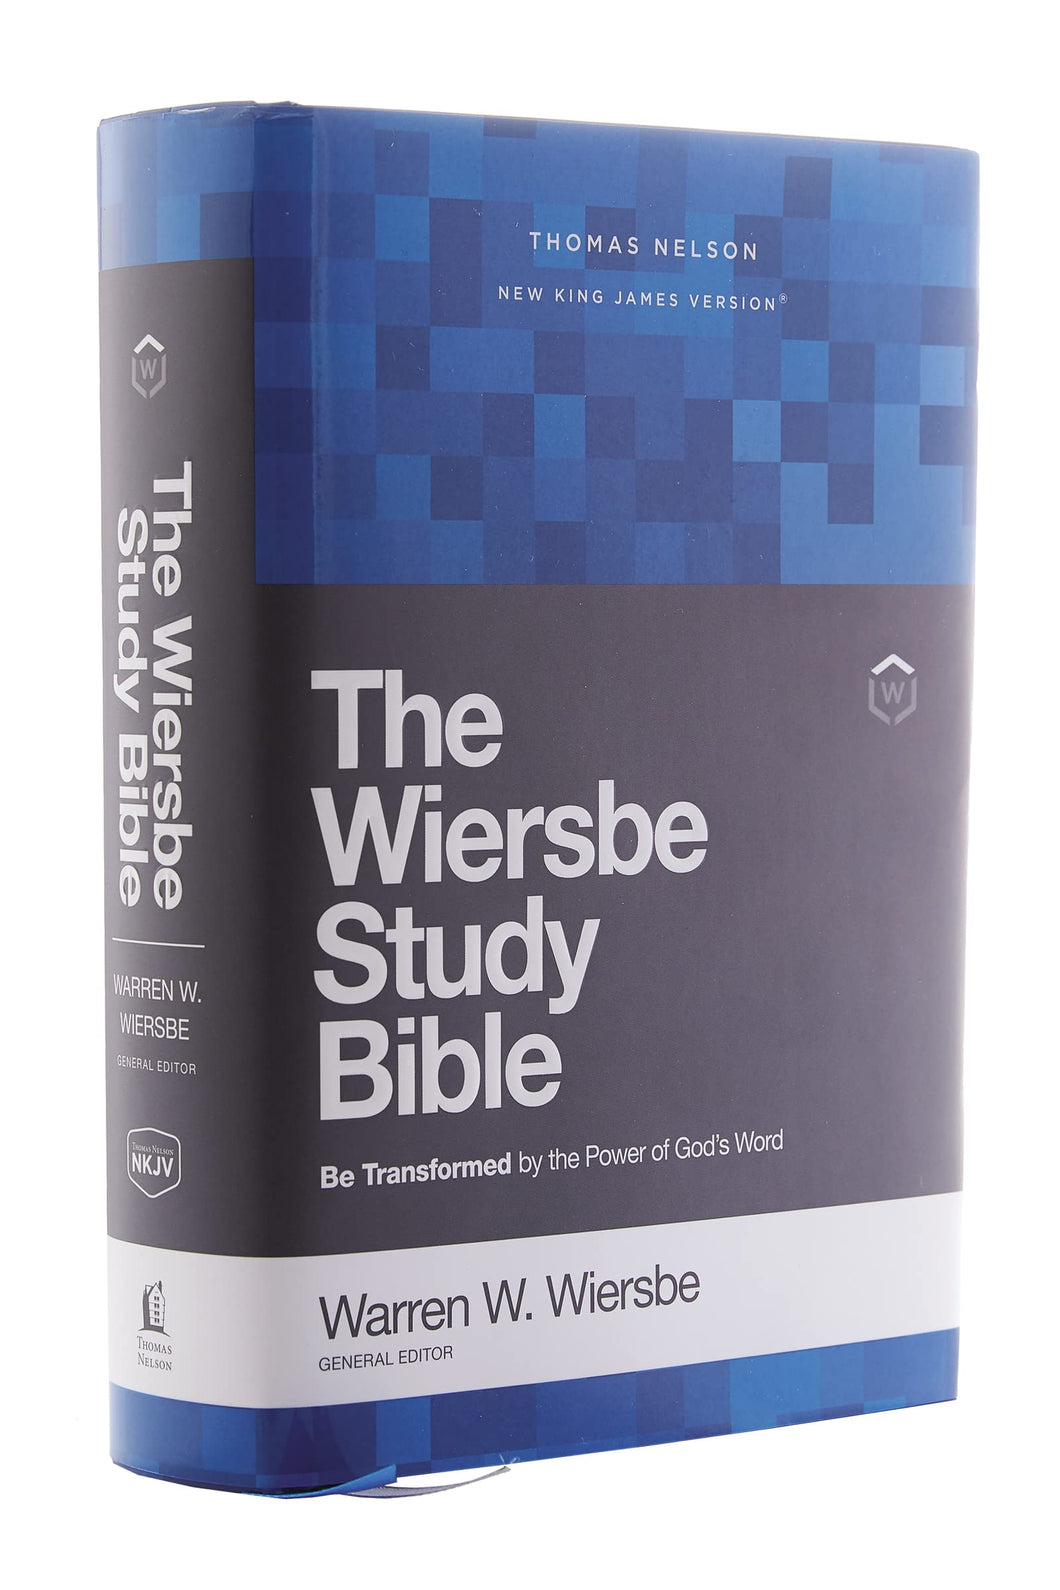 NKJV, Wiersbe Study Bible, Hardcover, Red Letter, Comfort Print: Be Transformed by the Power of God’s Word Hardcover